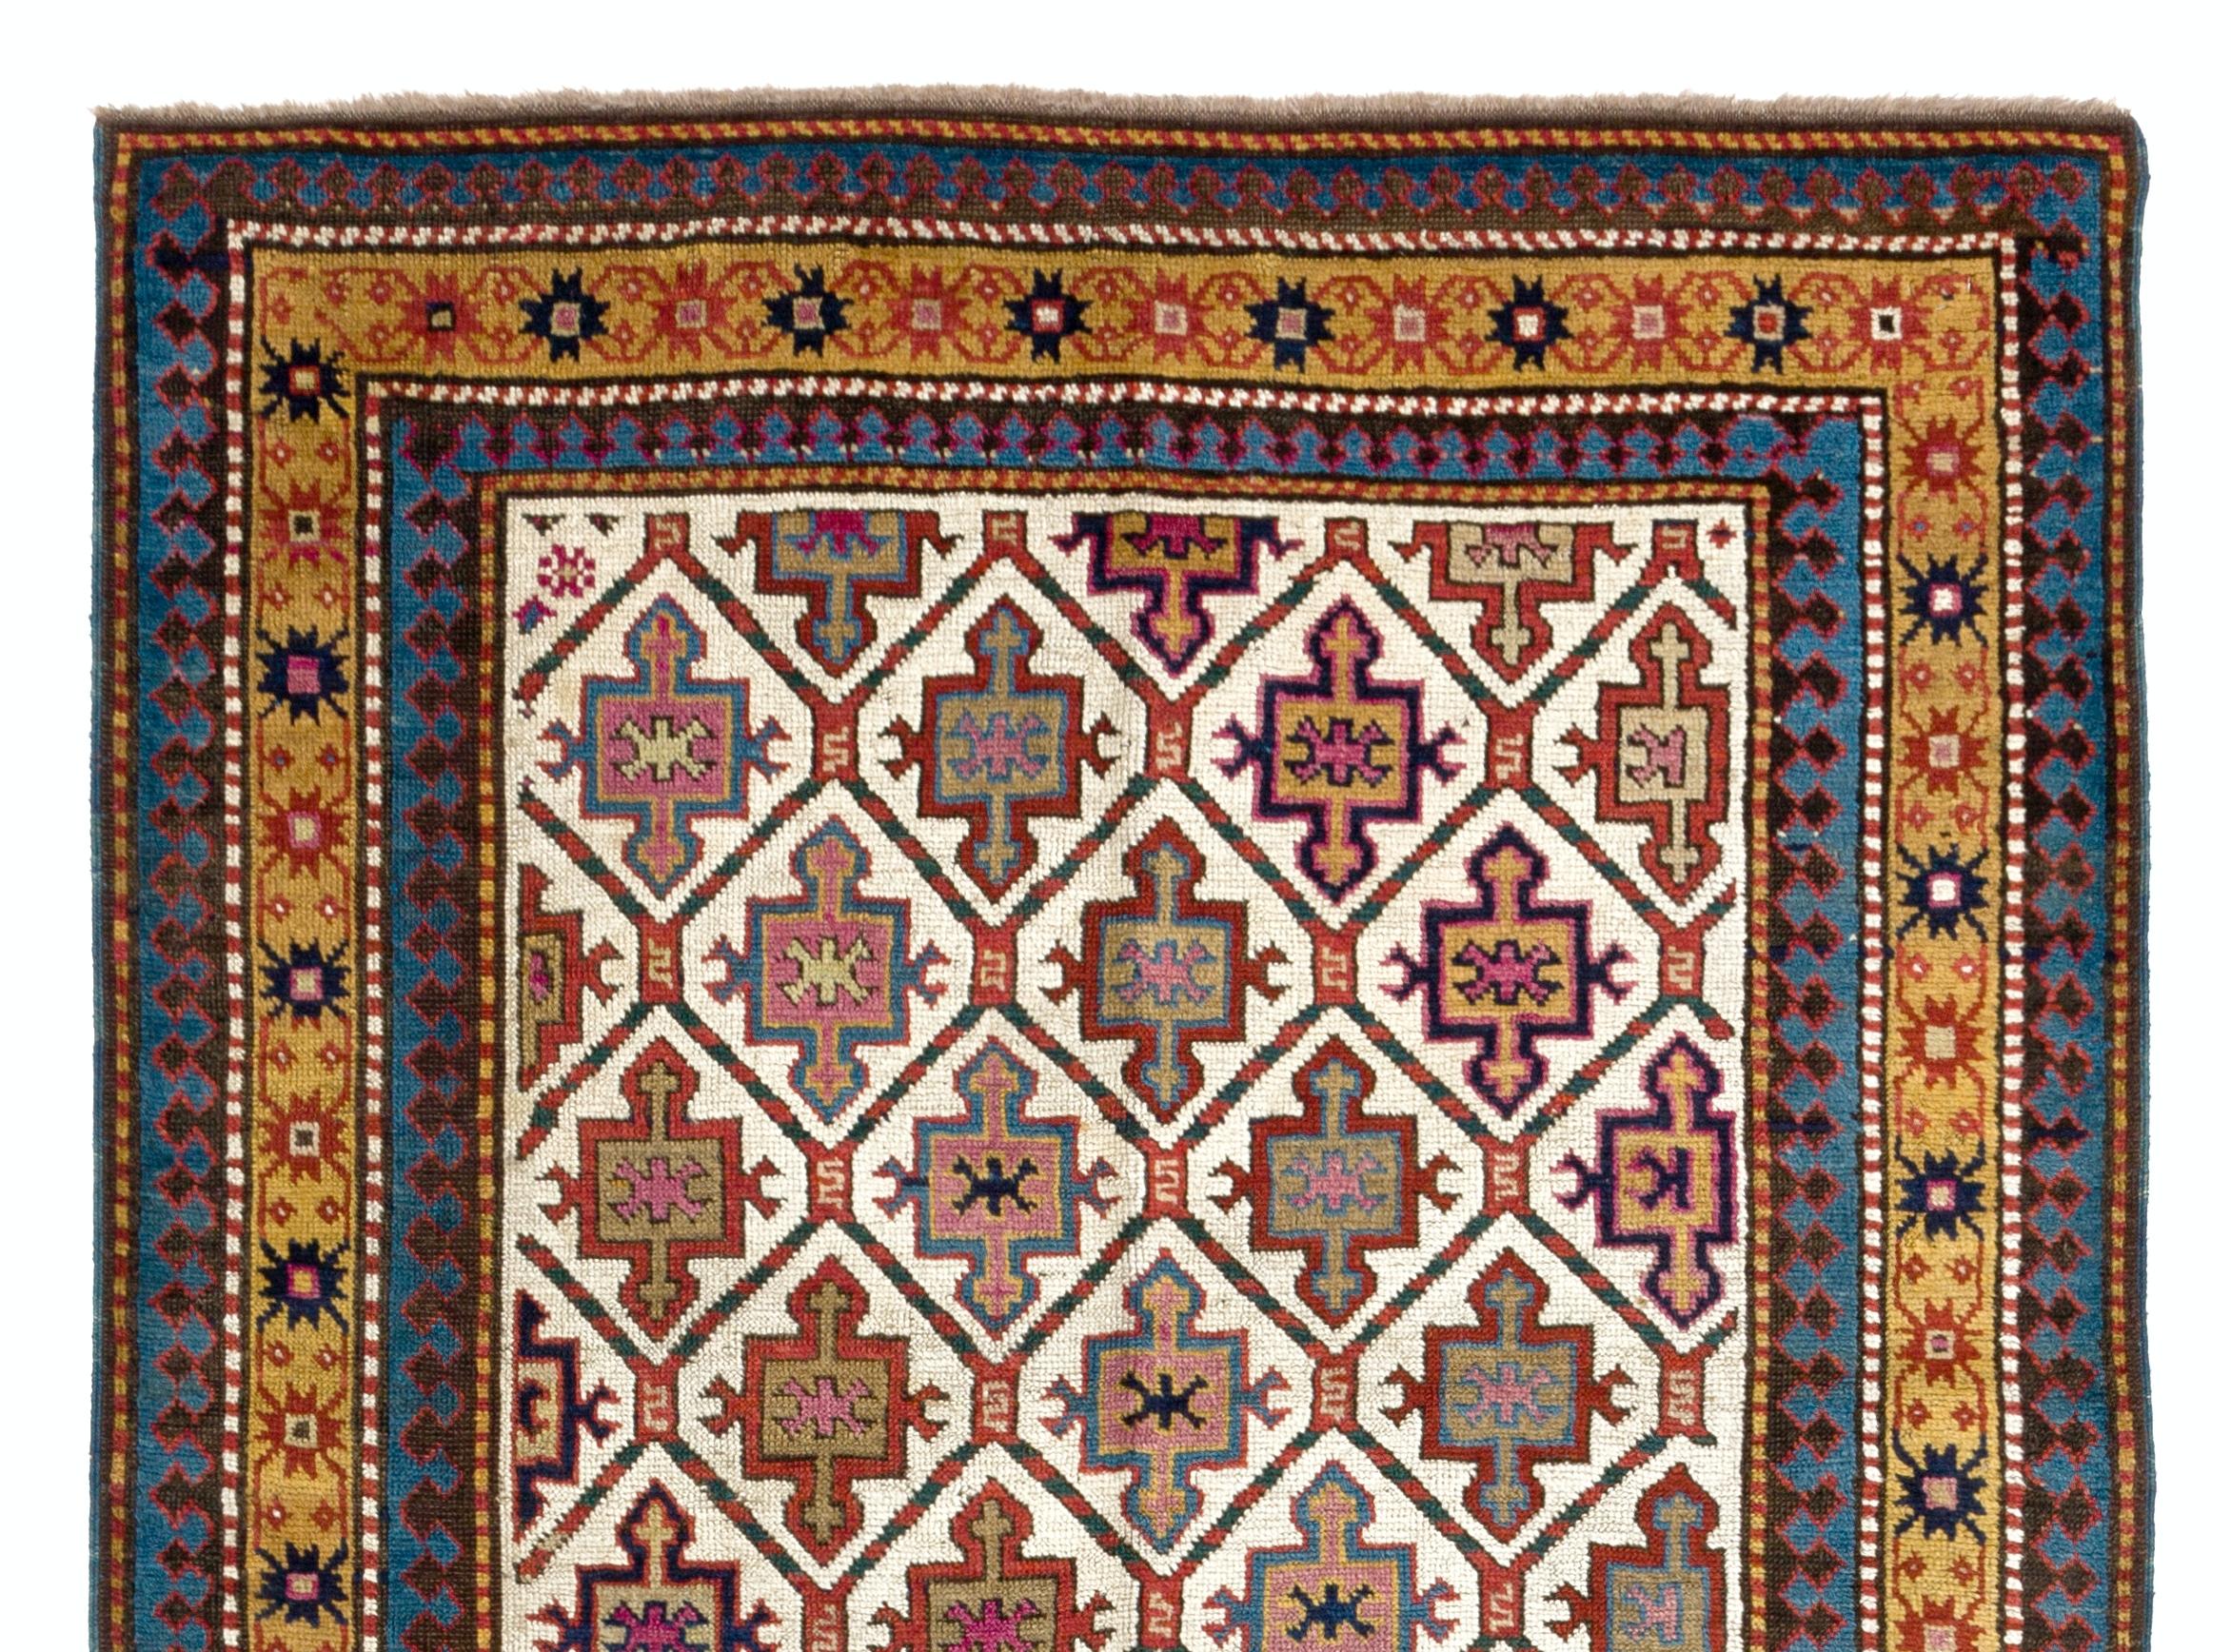 Hand-Knotted 3.6x8.4 ft Rare Antique Caucasian Kazak Rug from Karabagh, Dated, 1812 For Sale